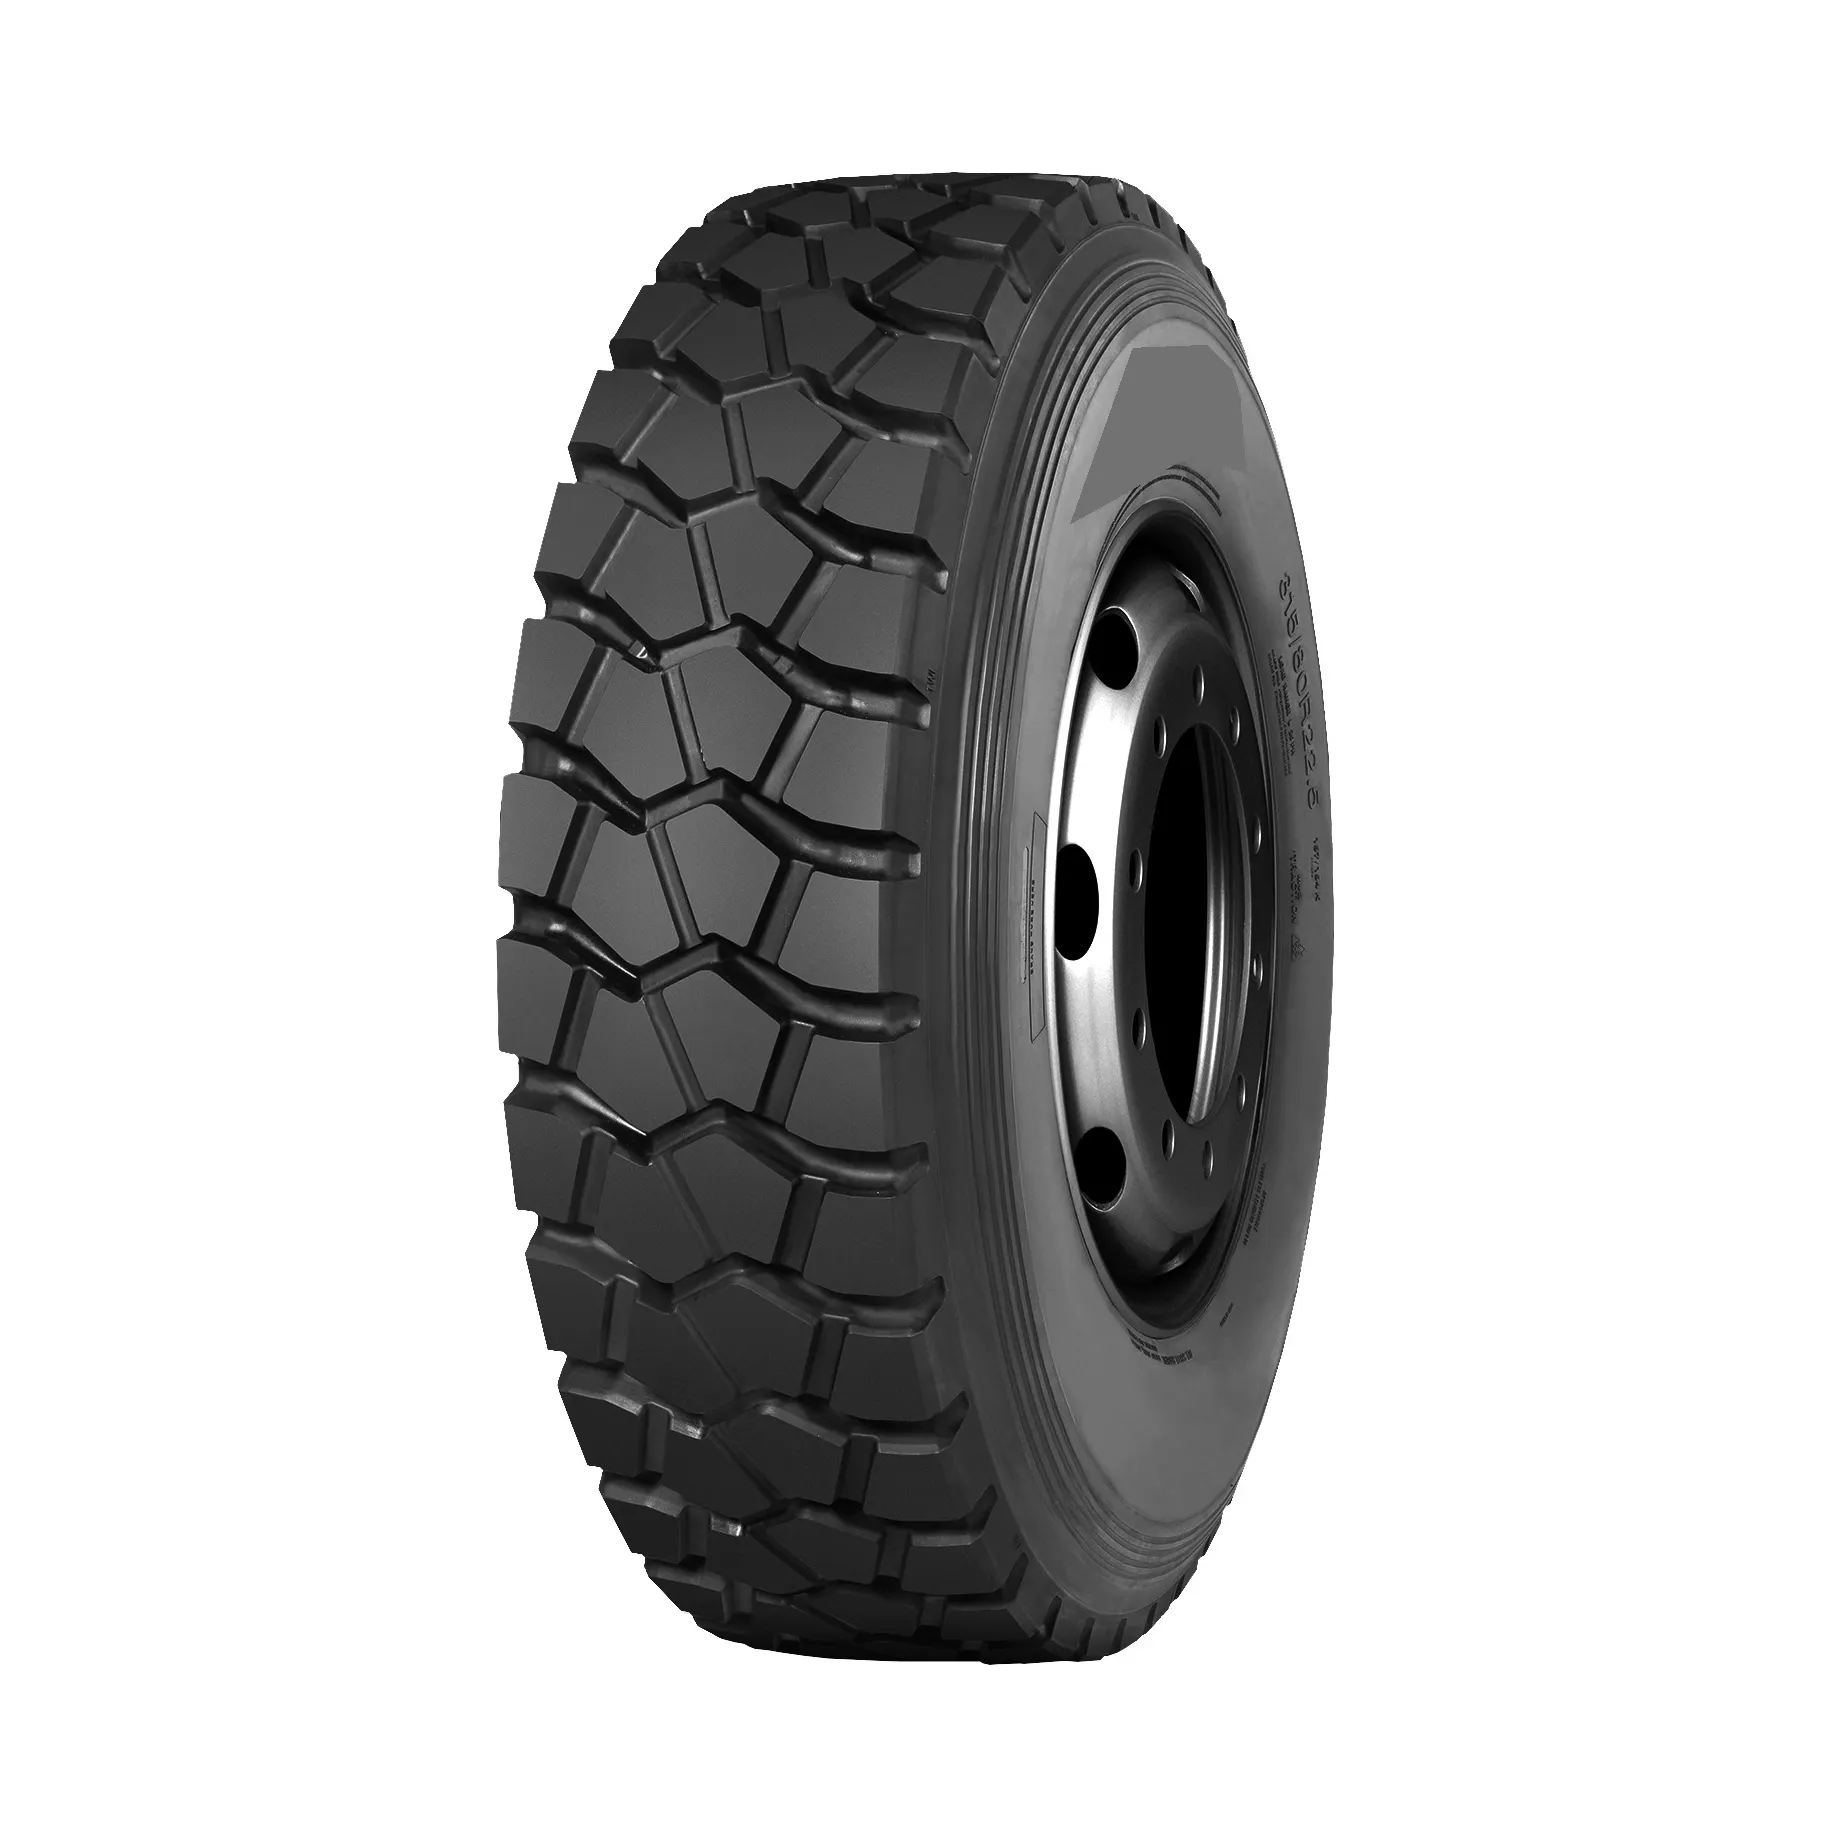 Cheap Used Tires in Bulk Wholesale Cheap Car Tires